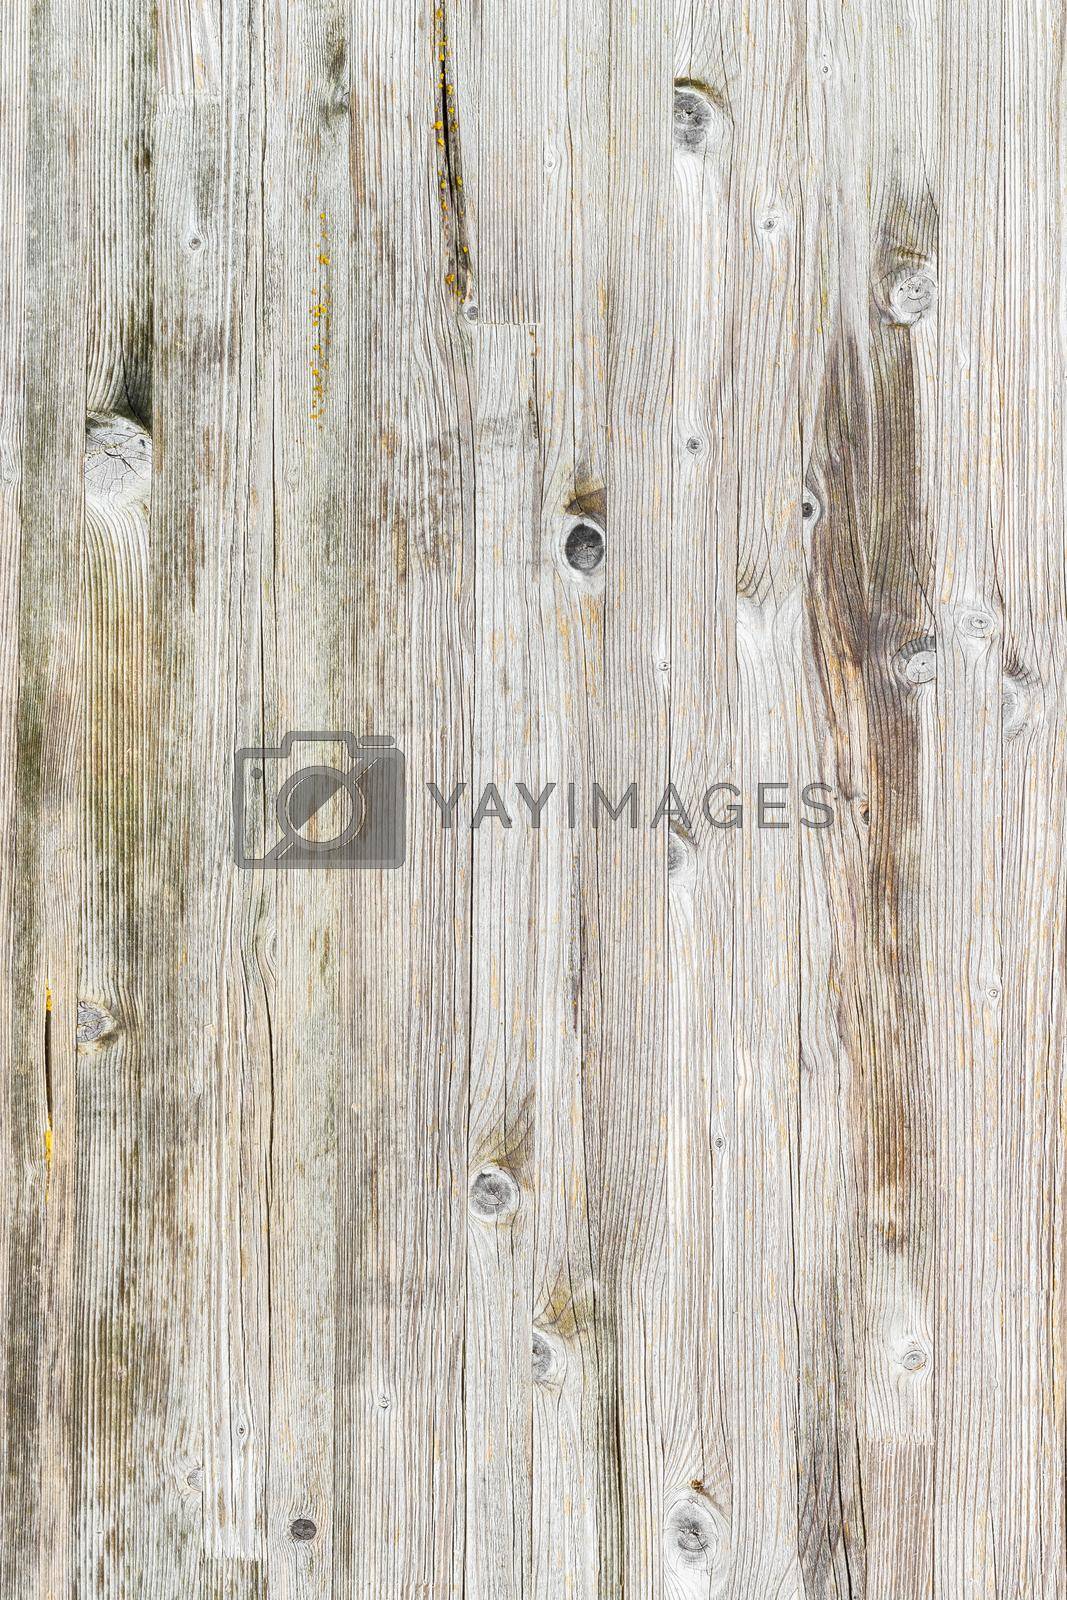 Royalty free image of Light wood background by germanopoli